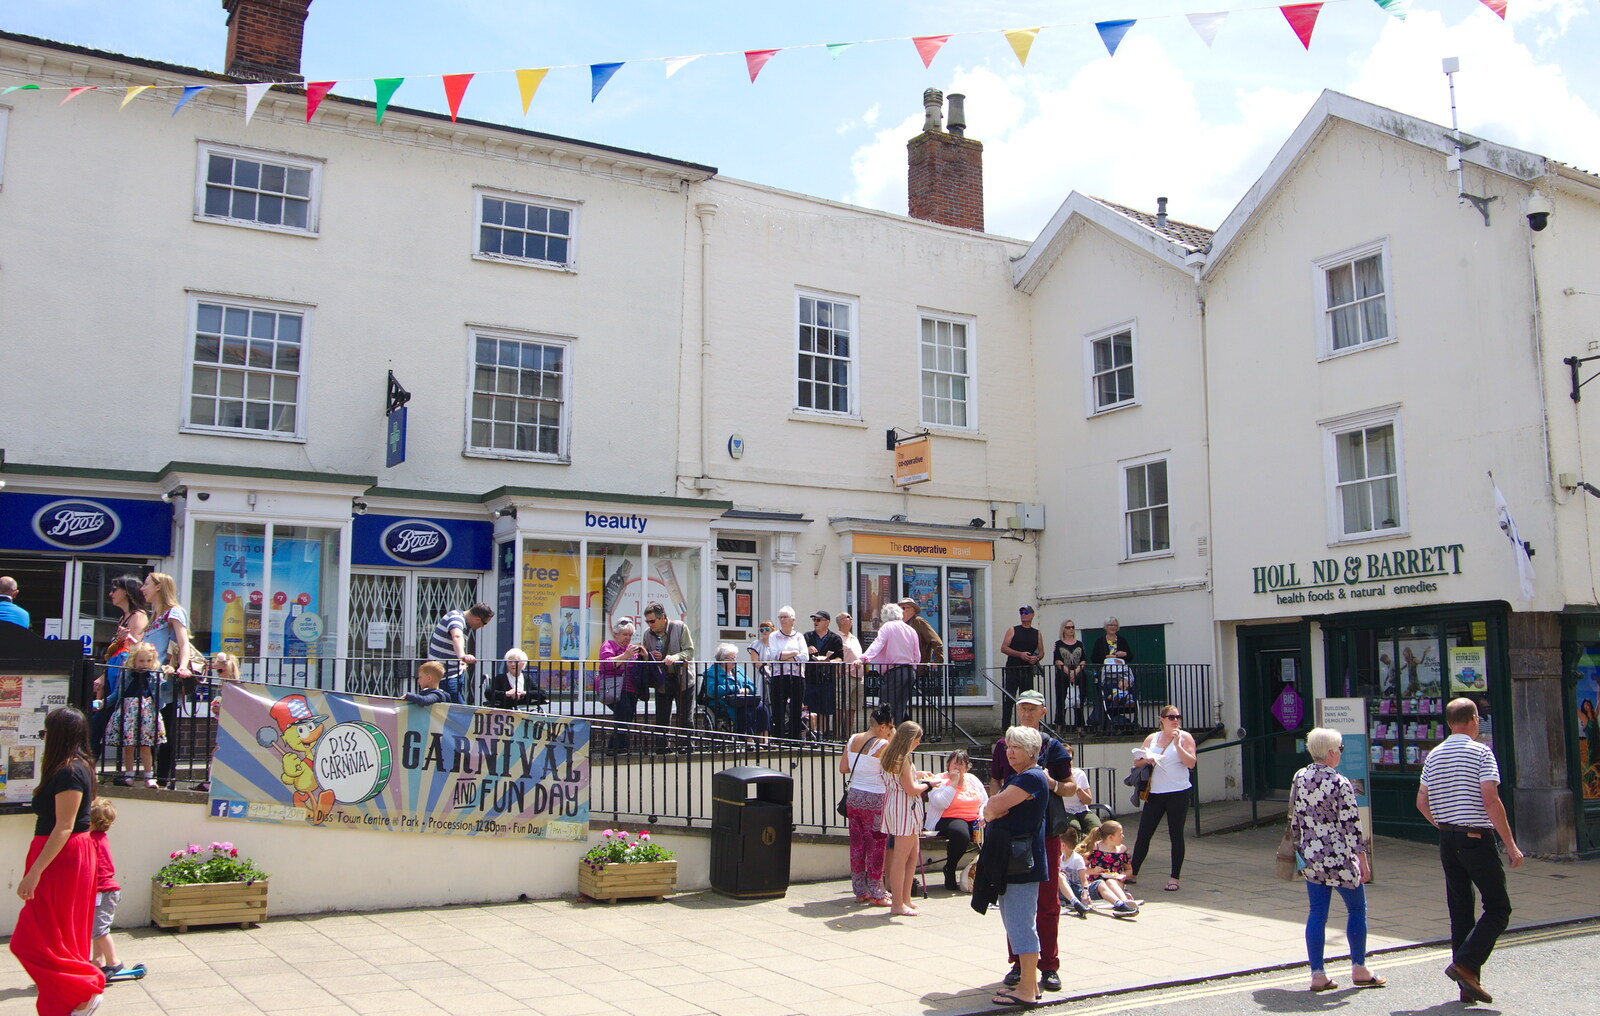 Boots and Holland & Barrett from The Diss Carnival 2019, Diss, Norfolk - 9th June 2019